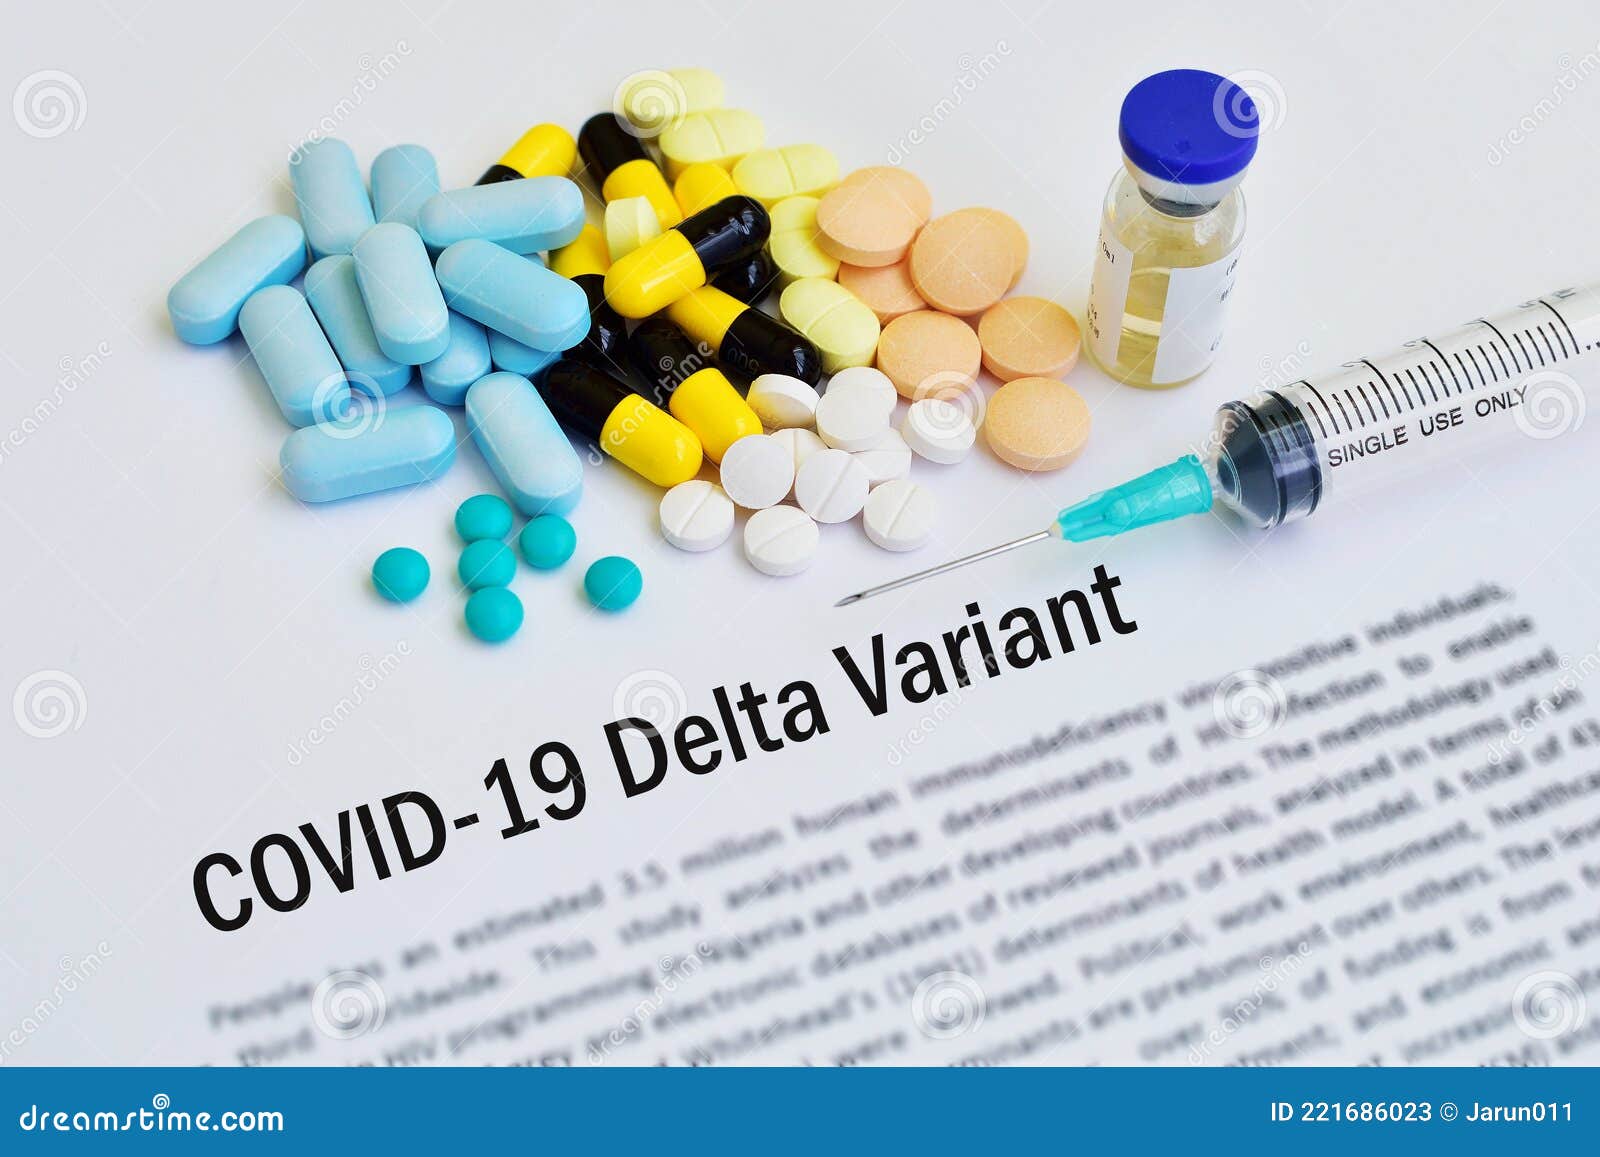 syringe with drugs for delta variant of covid-19 treatment